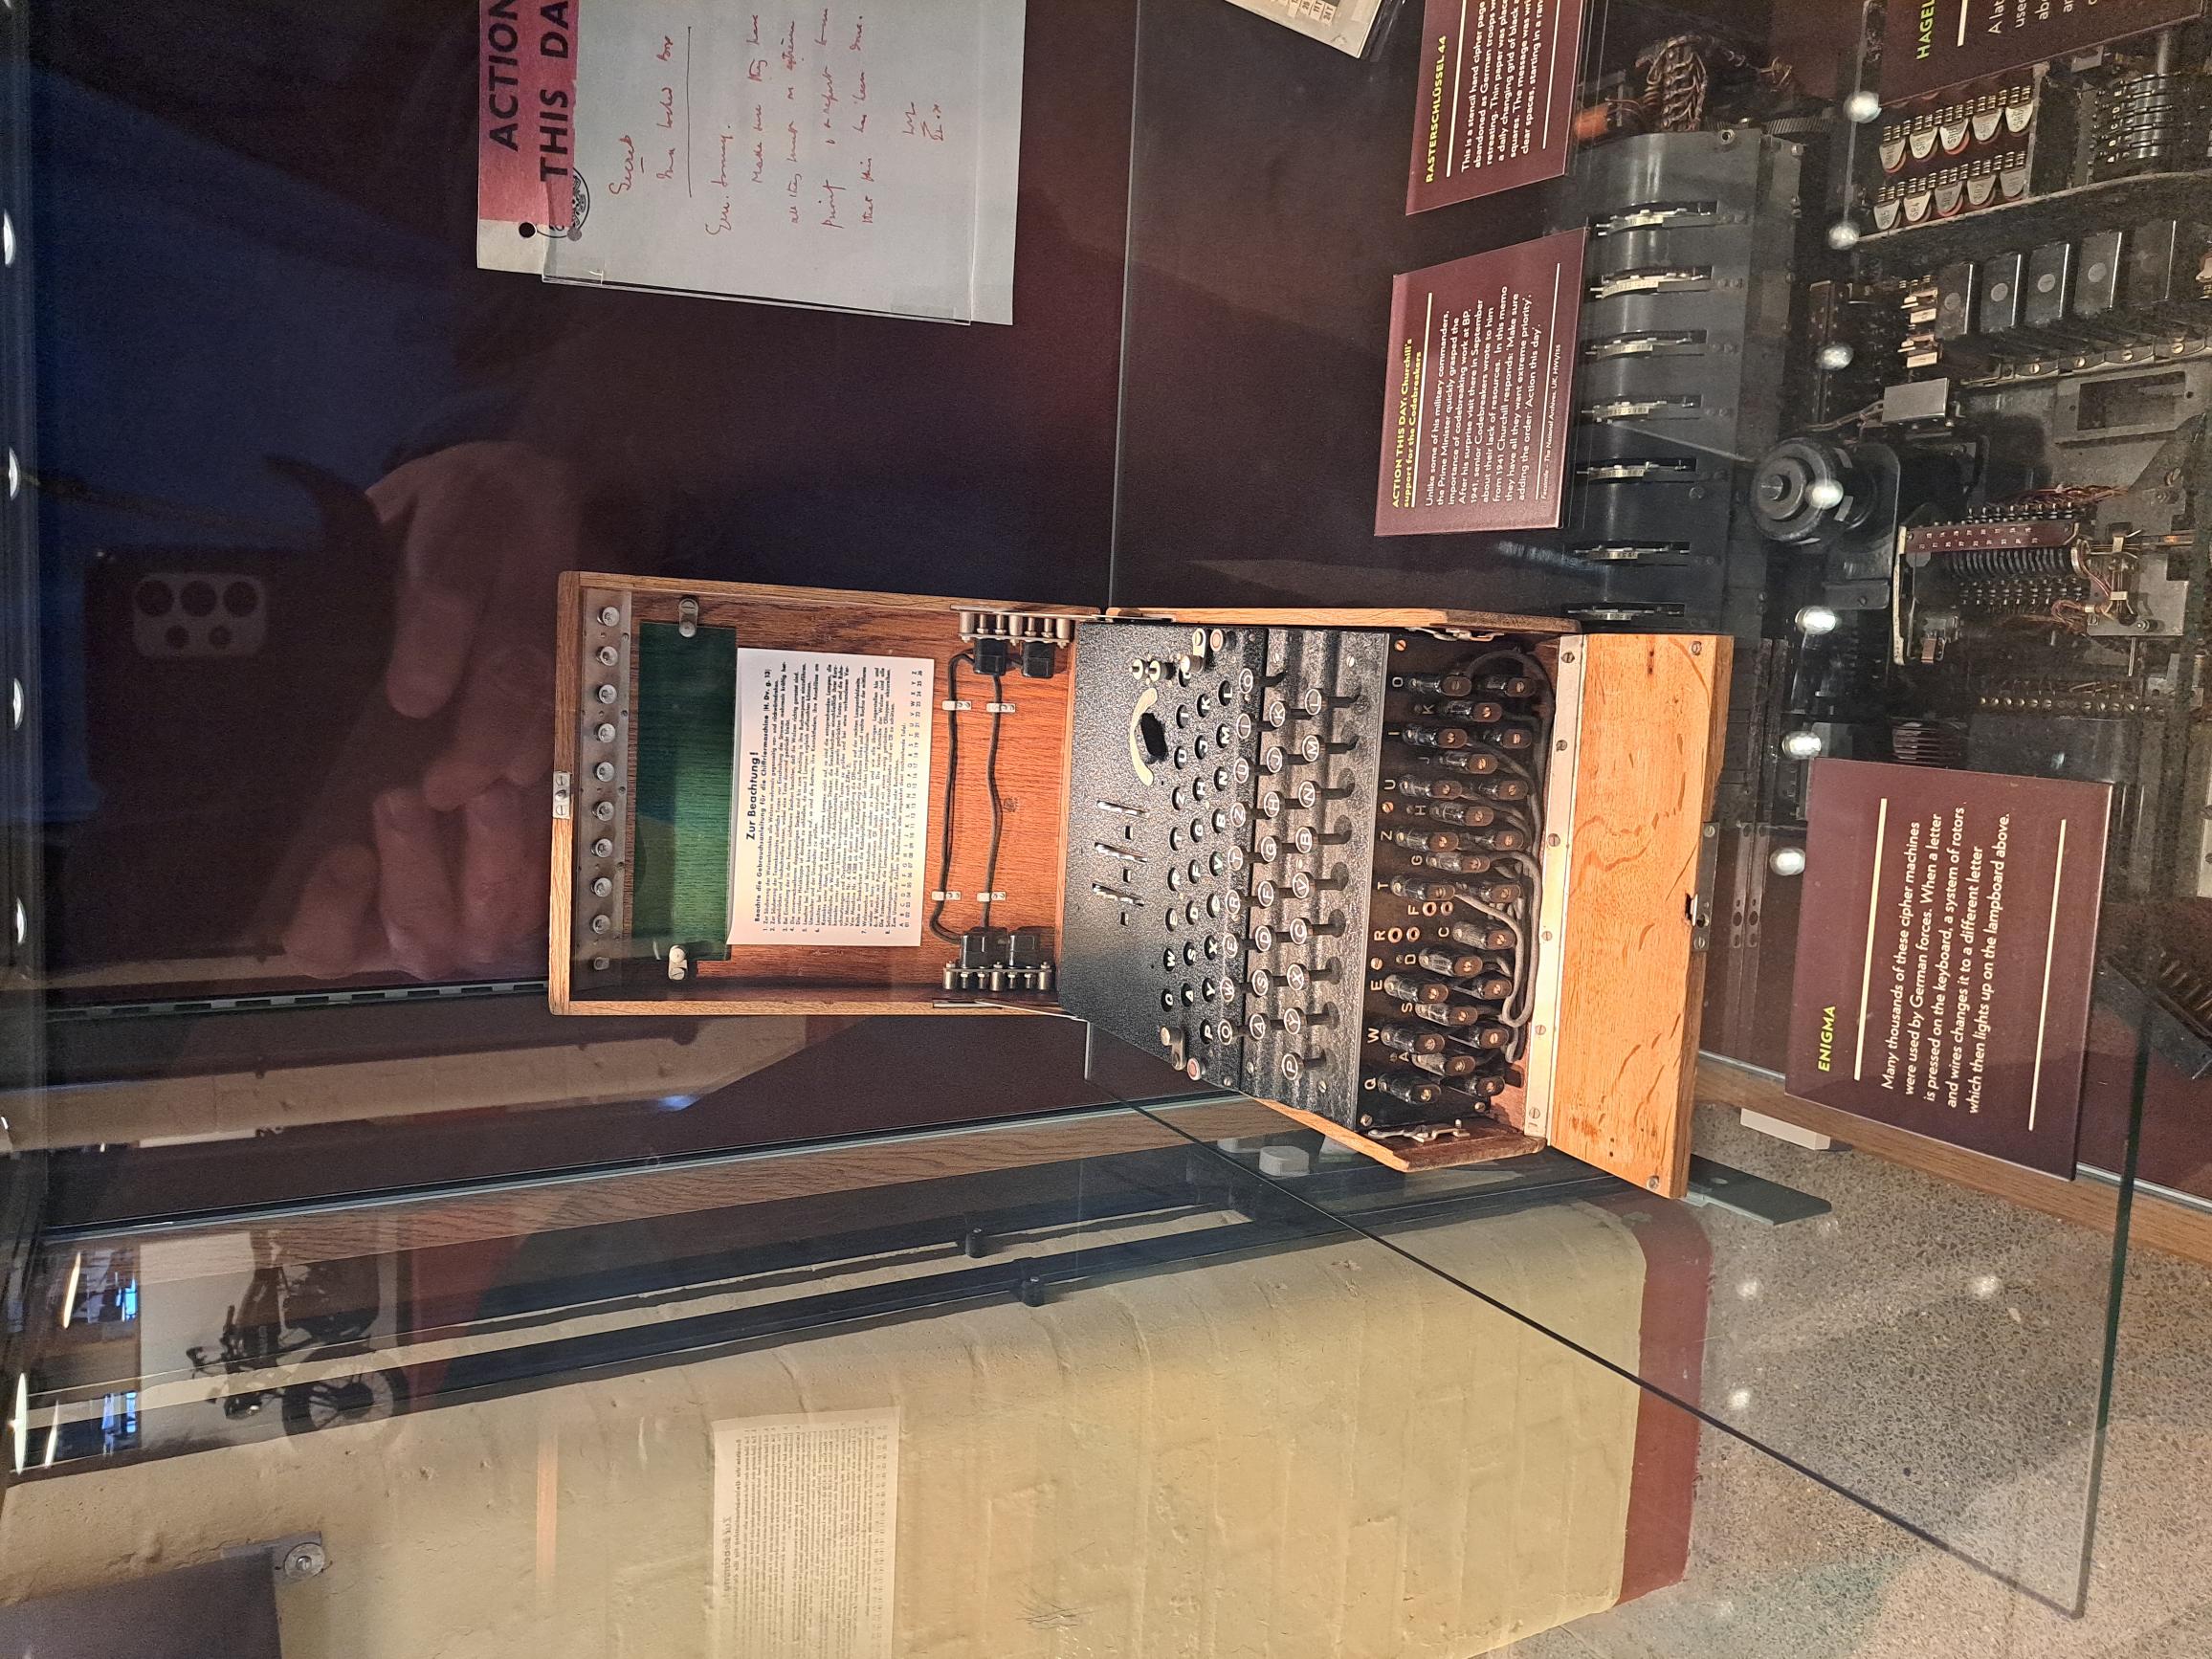 An Enigma machine at Bletchley Park